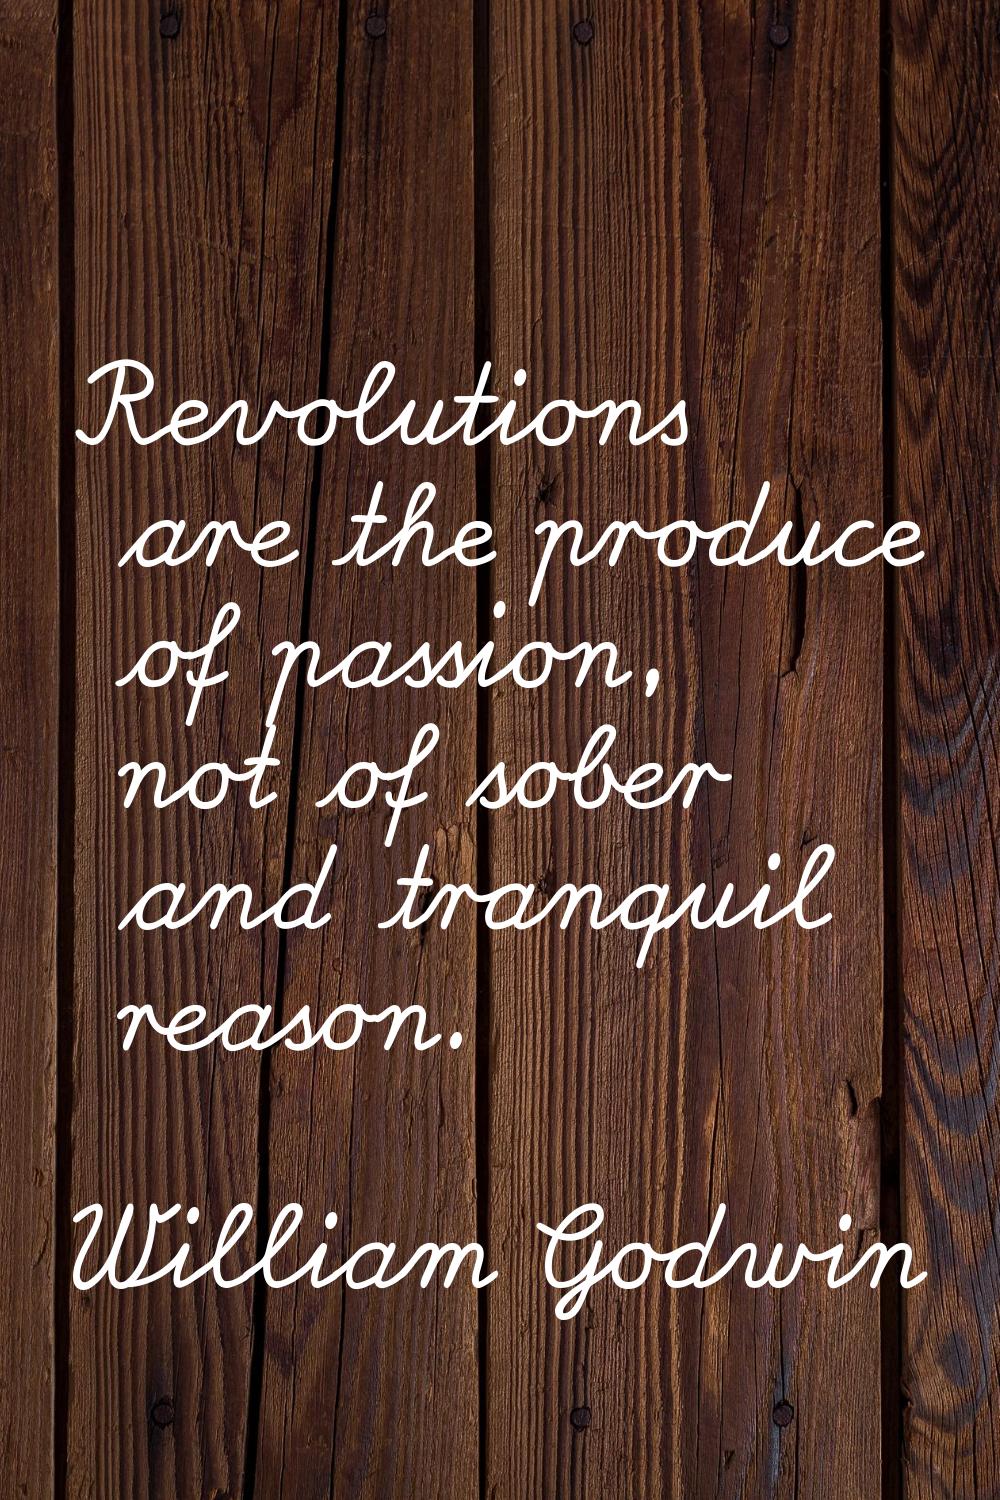 Revolutions are the produce of passion, not of sober and tranquil reason.